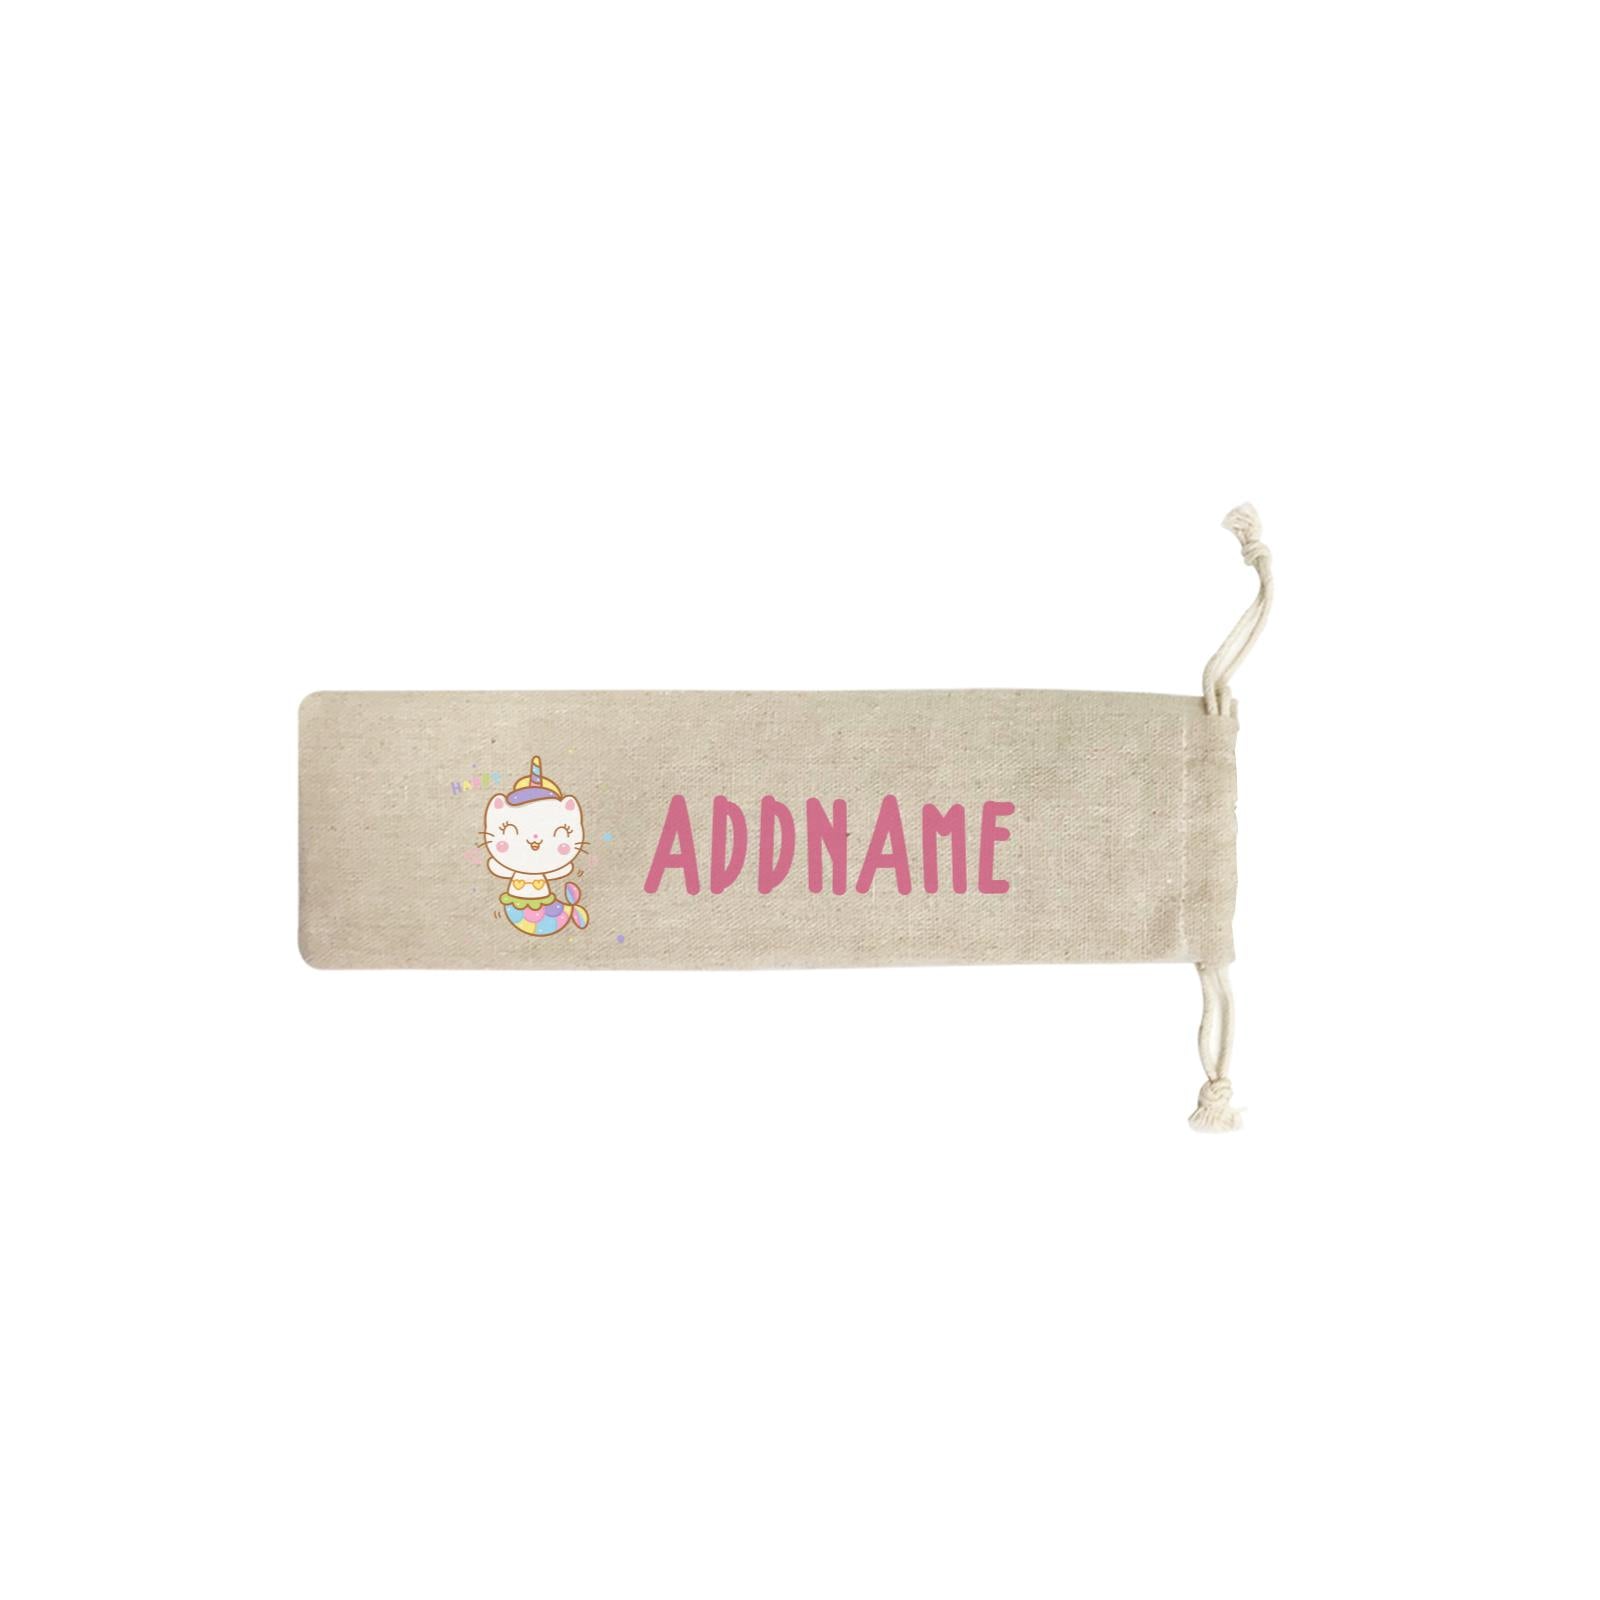 Unicorn And Princess Series Cute Happy Cat Mermaid Addname SB Straw Pouch (No Straws included)